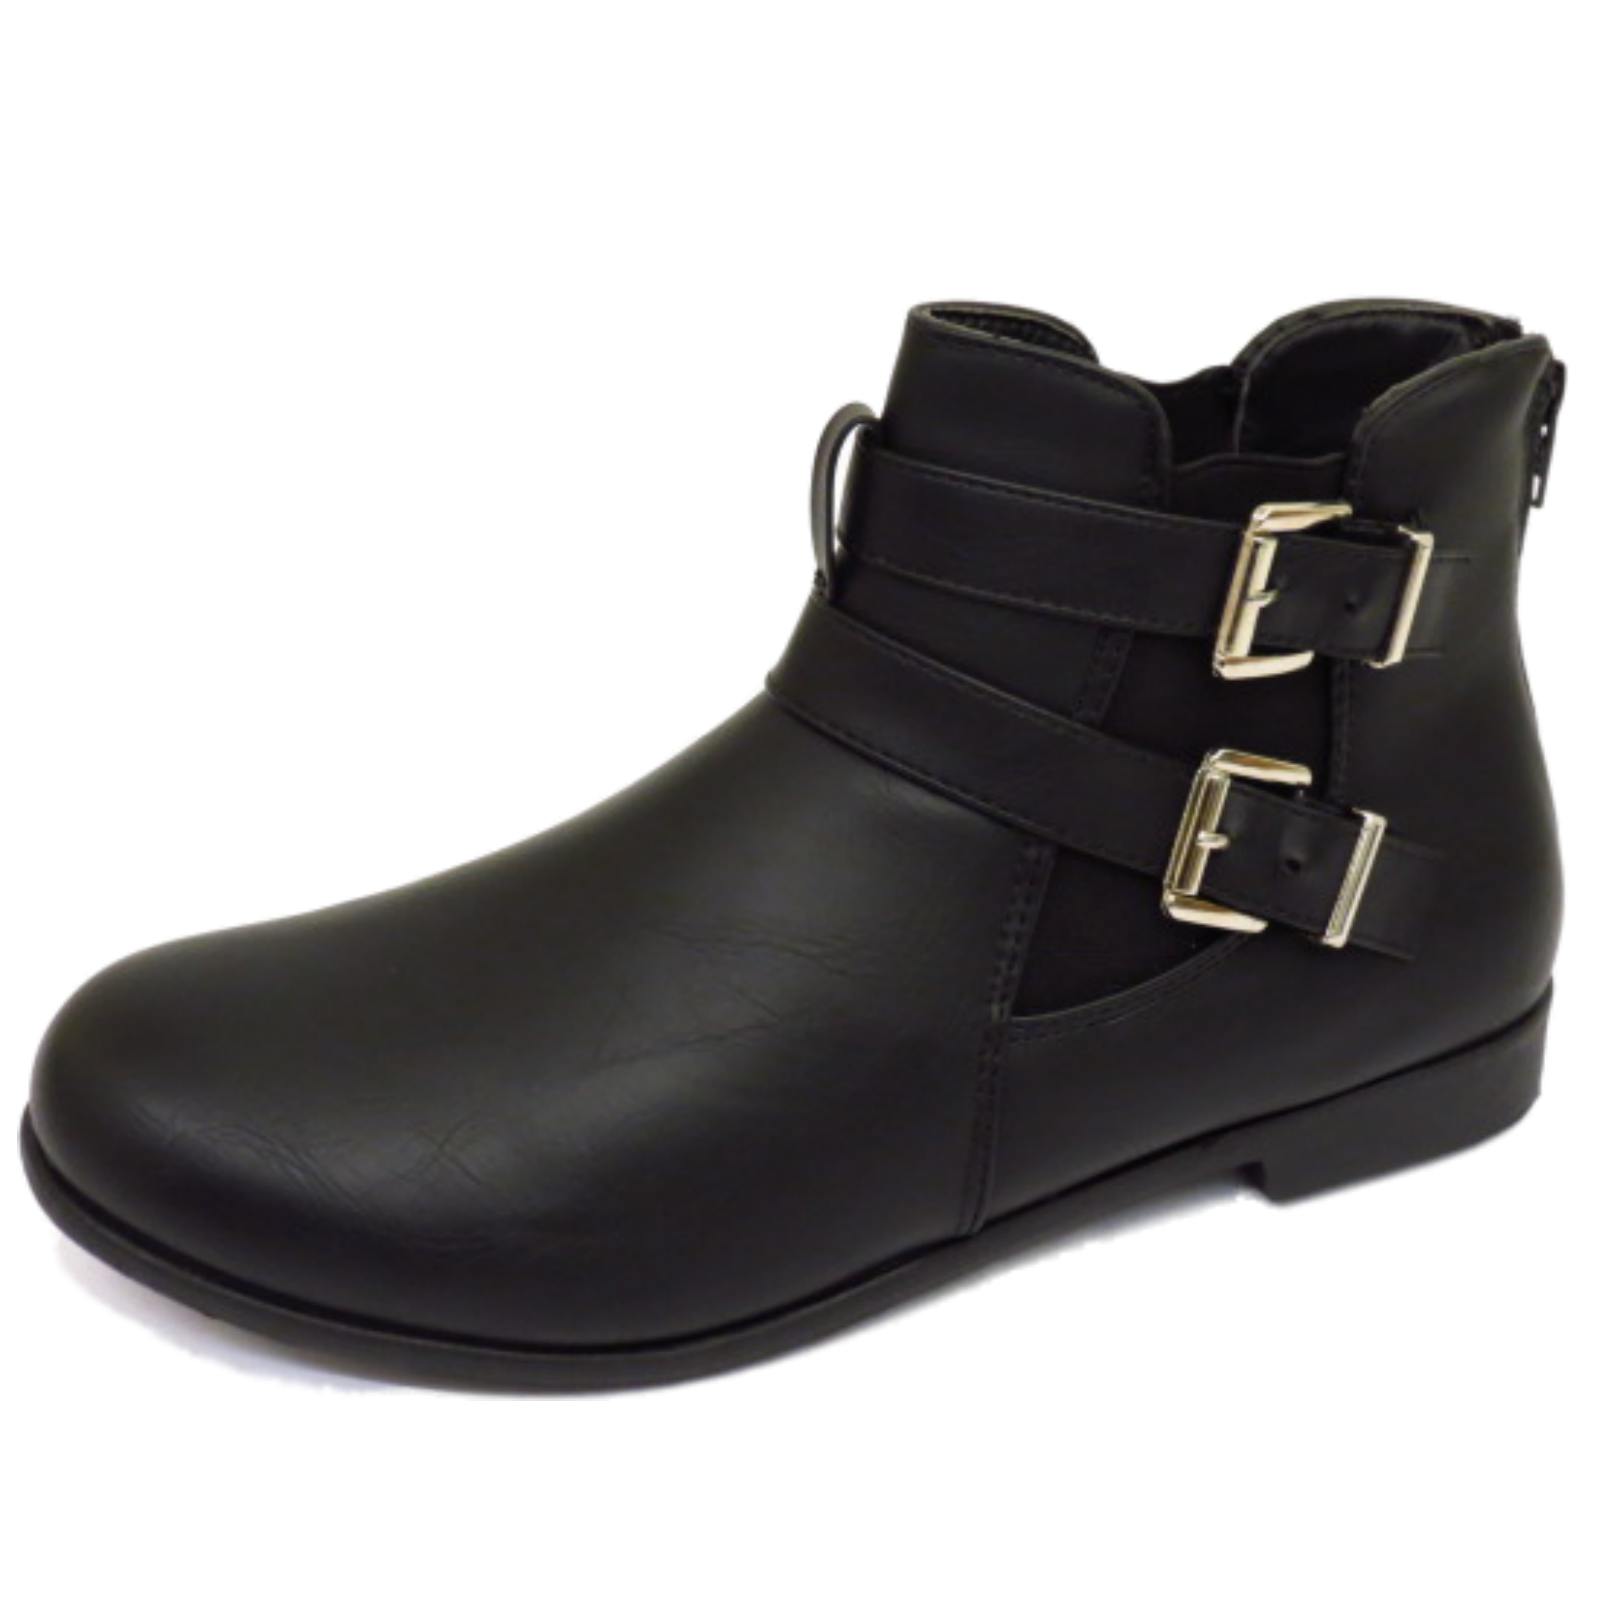 womens flat ankle boots uk cheap online